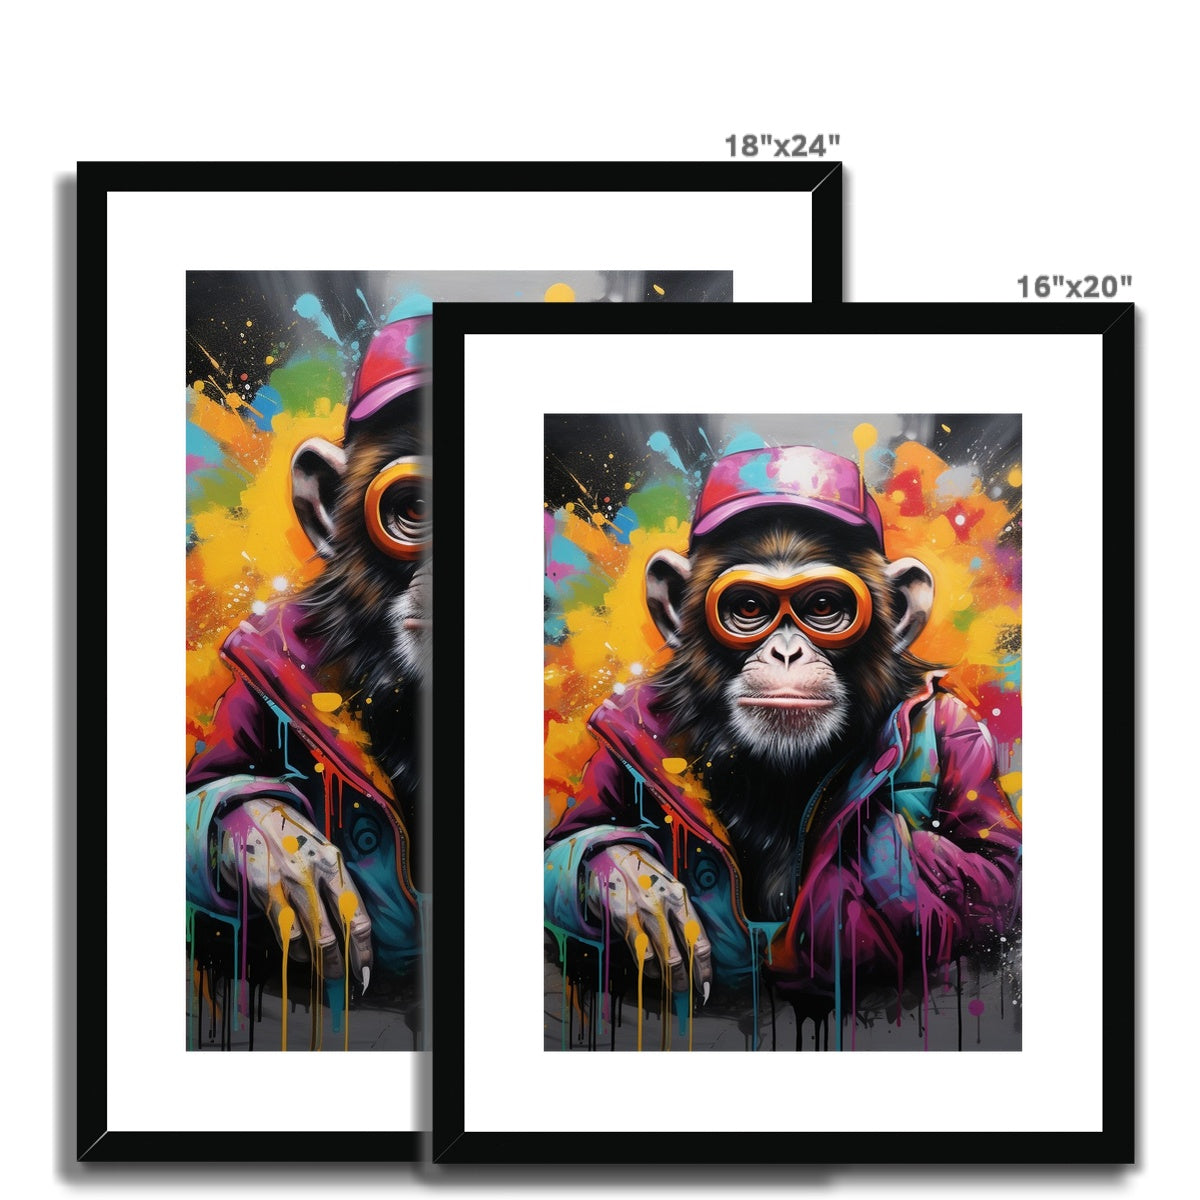 The Don Makeover: Limited Edition Framed & Mounted Print